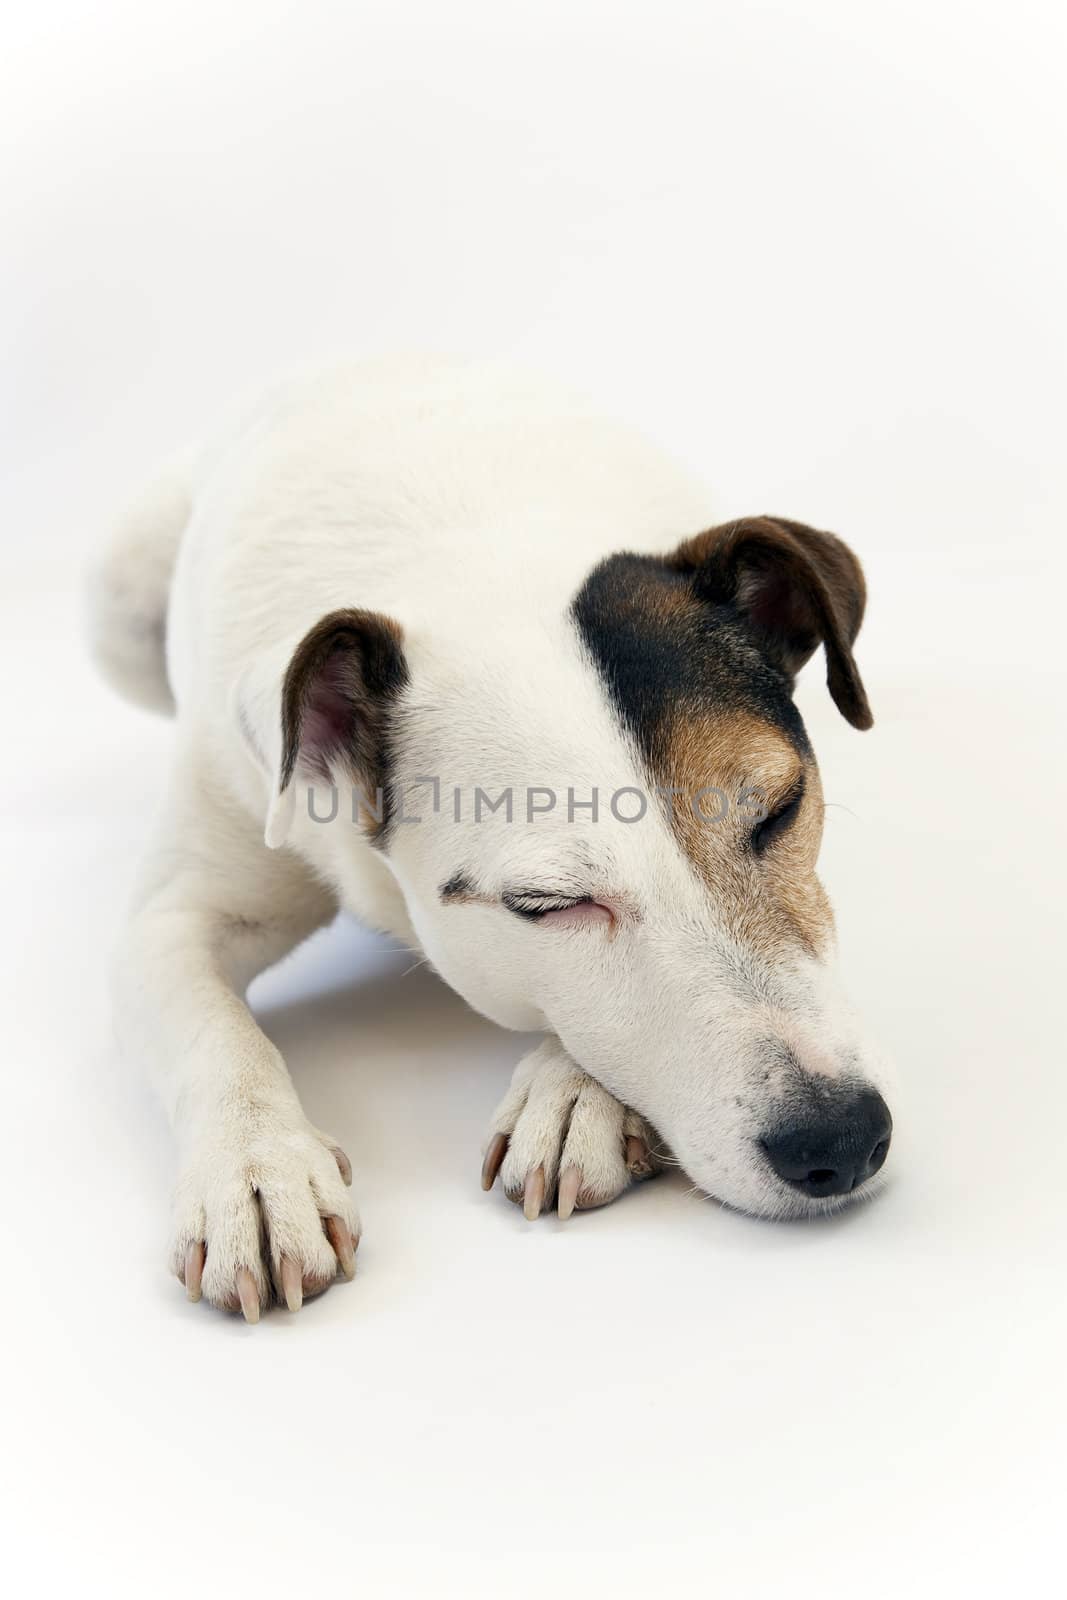 Portrait of a jack russell dog asleep on a white background.